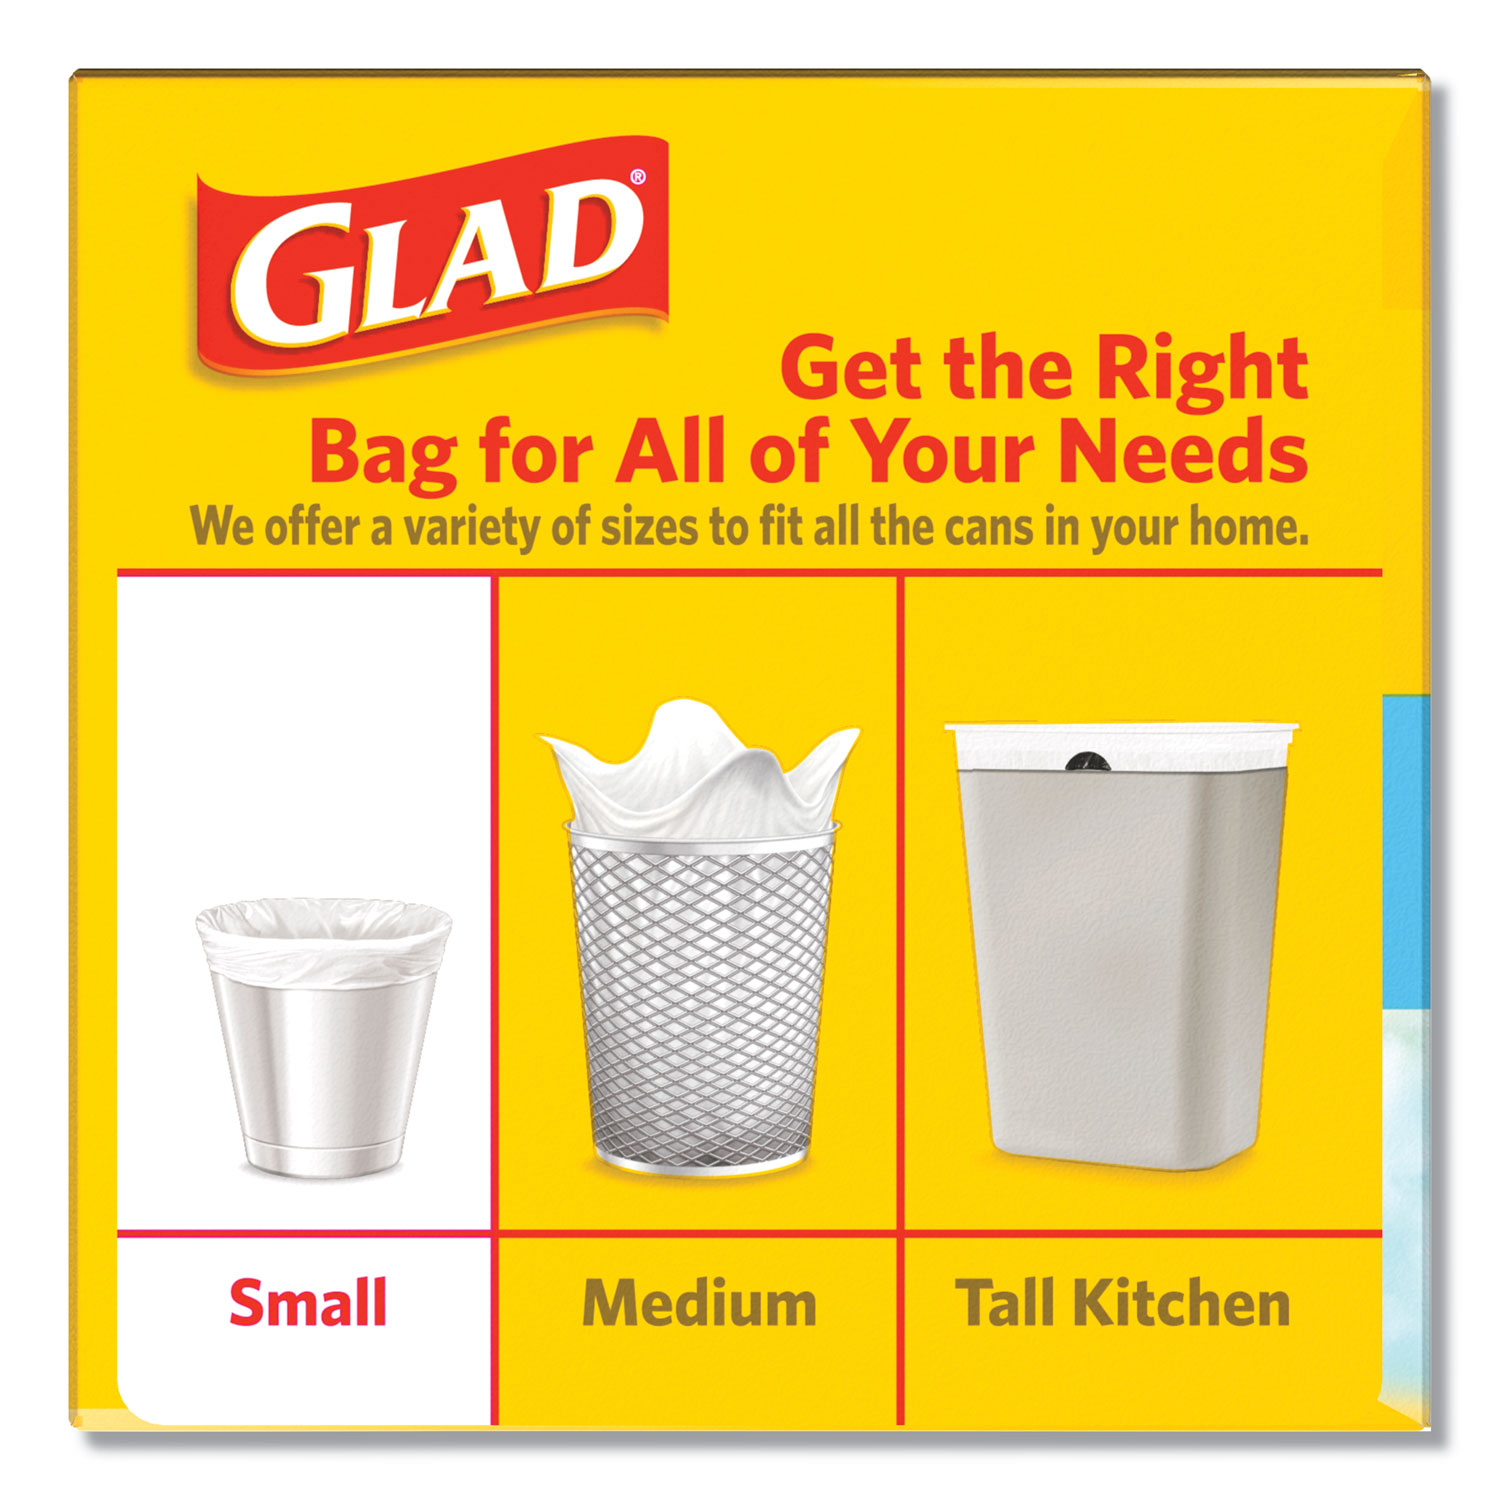 Small Trash Bags - 4 Gallons, Perfect For Household, Office, And